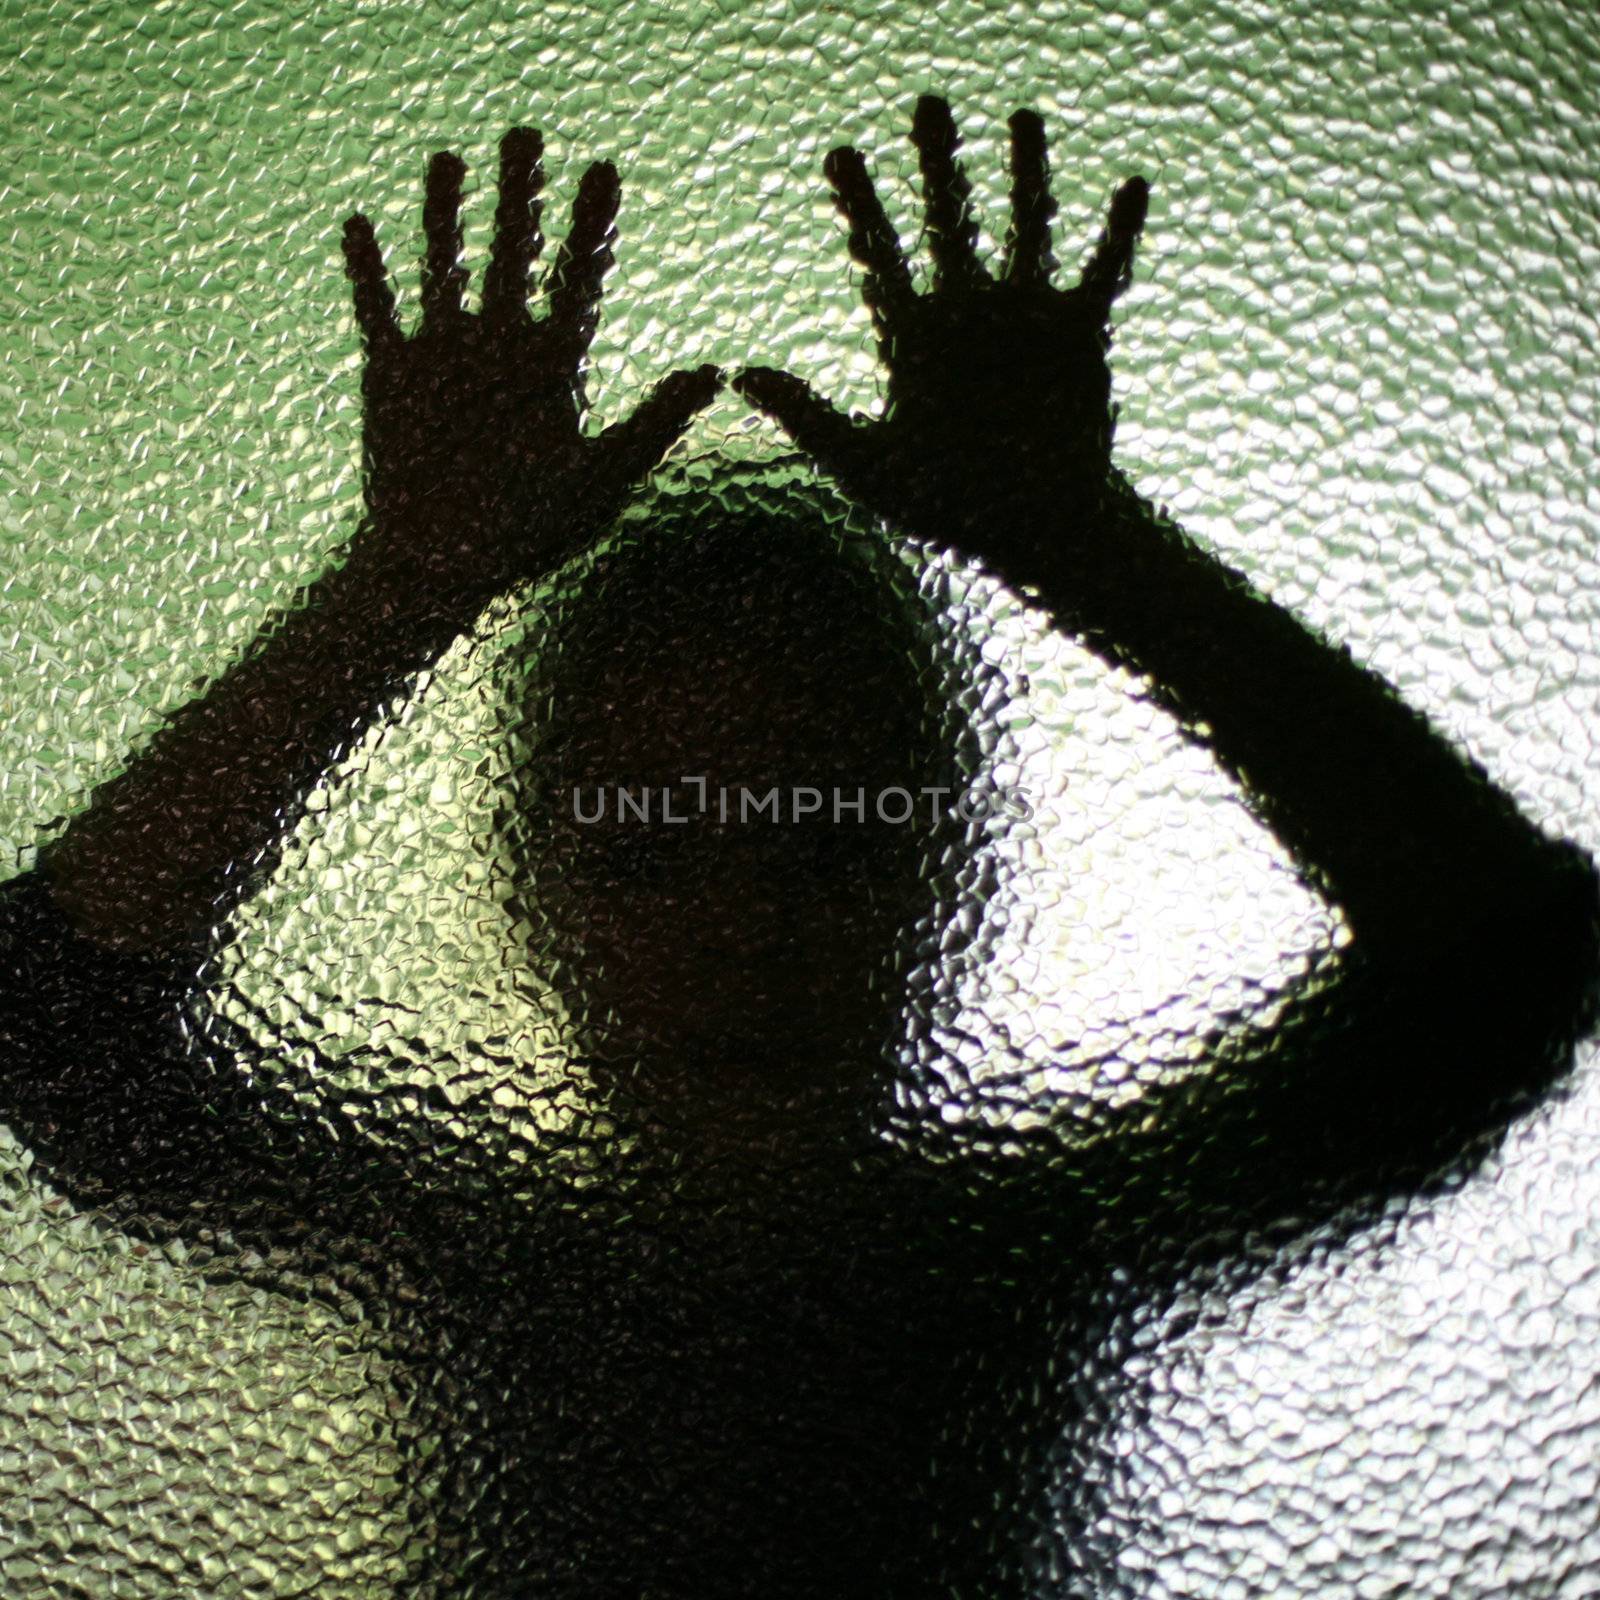 An image of a silhouette behind glass